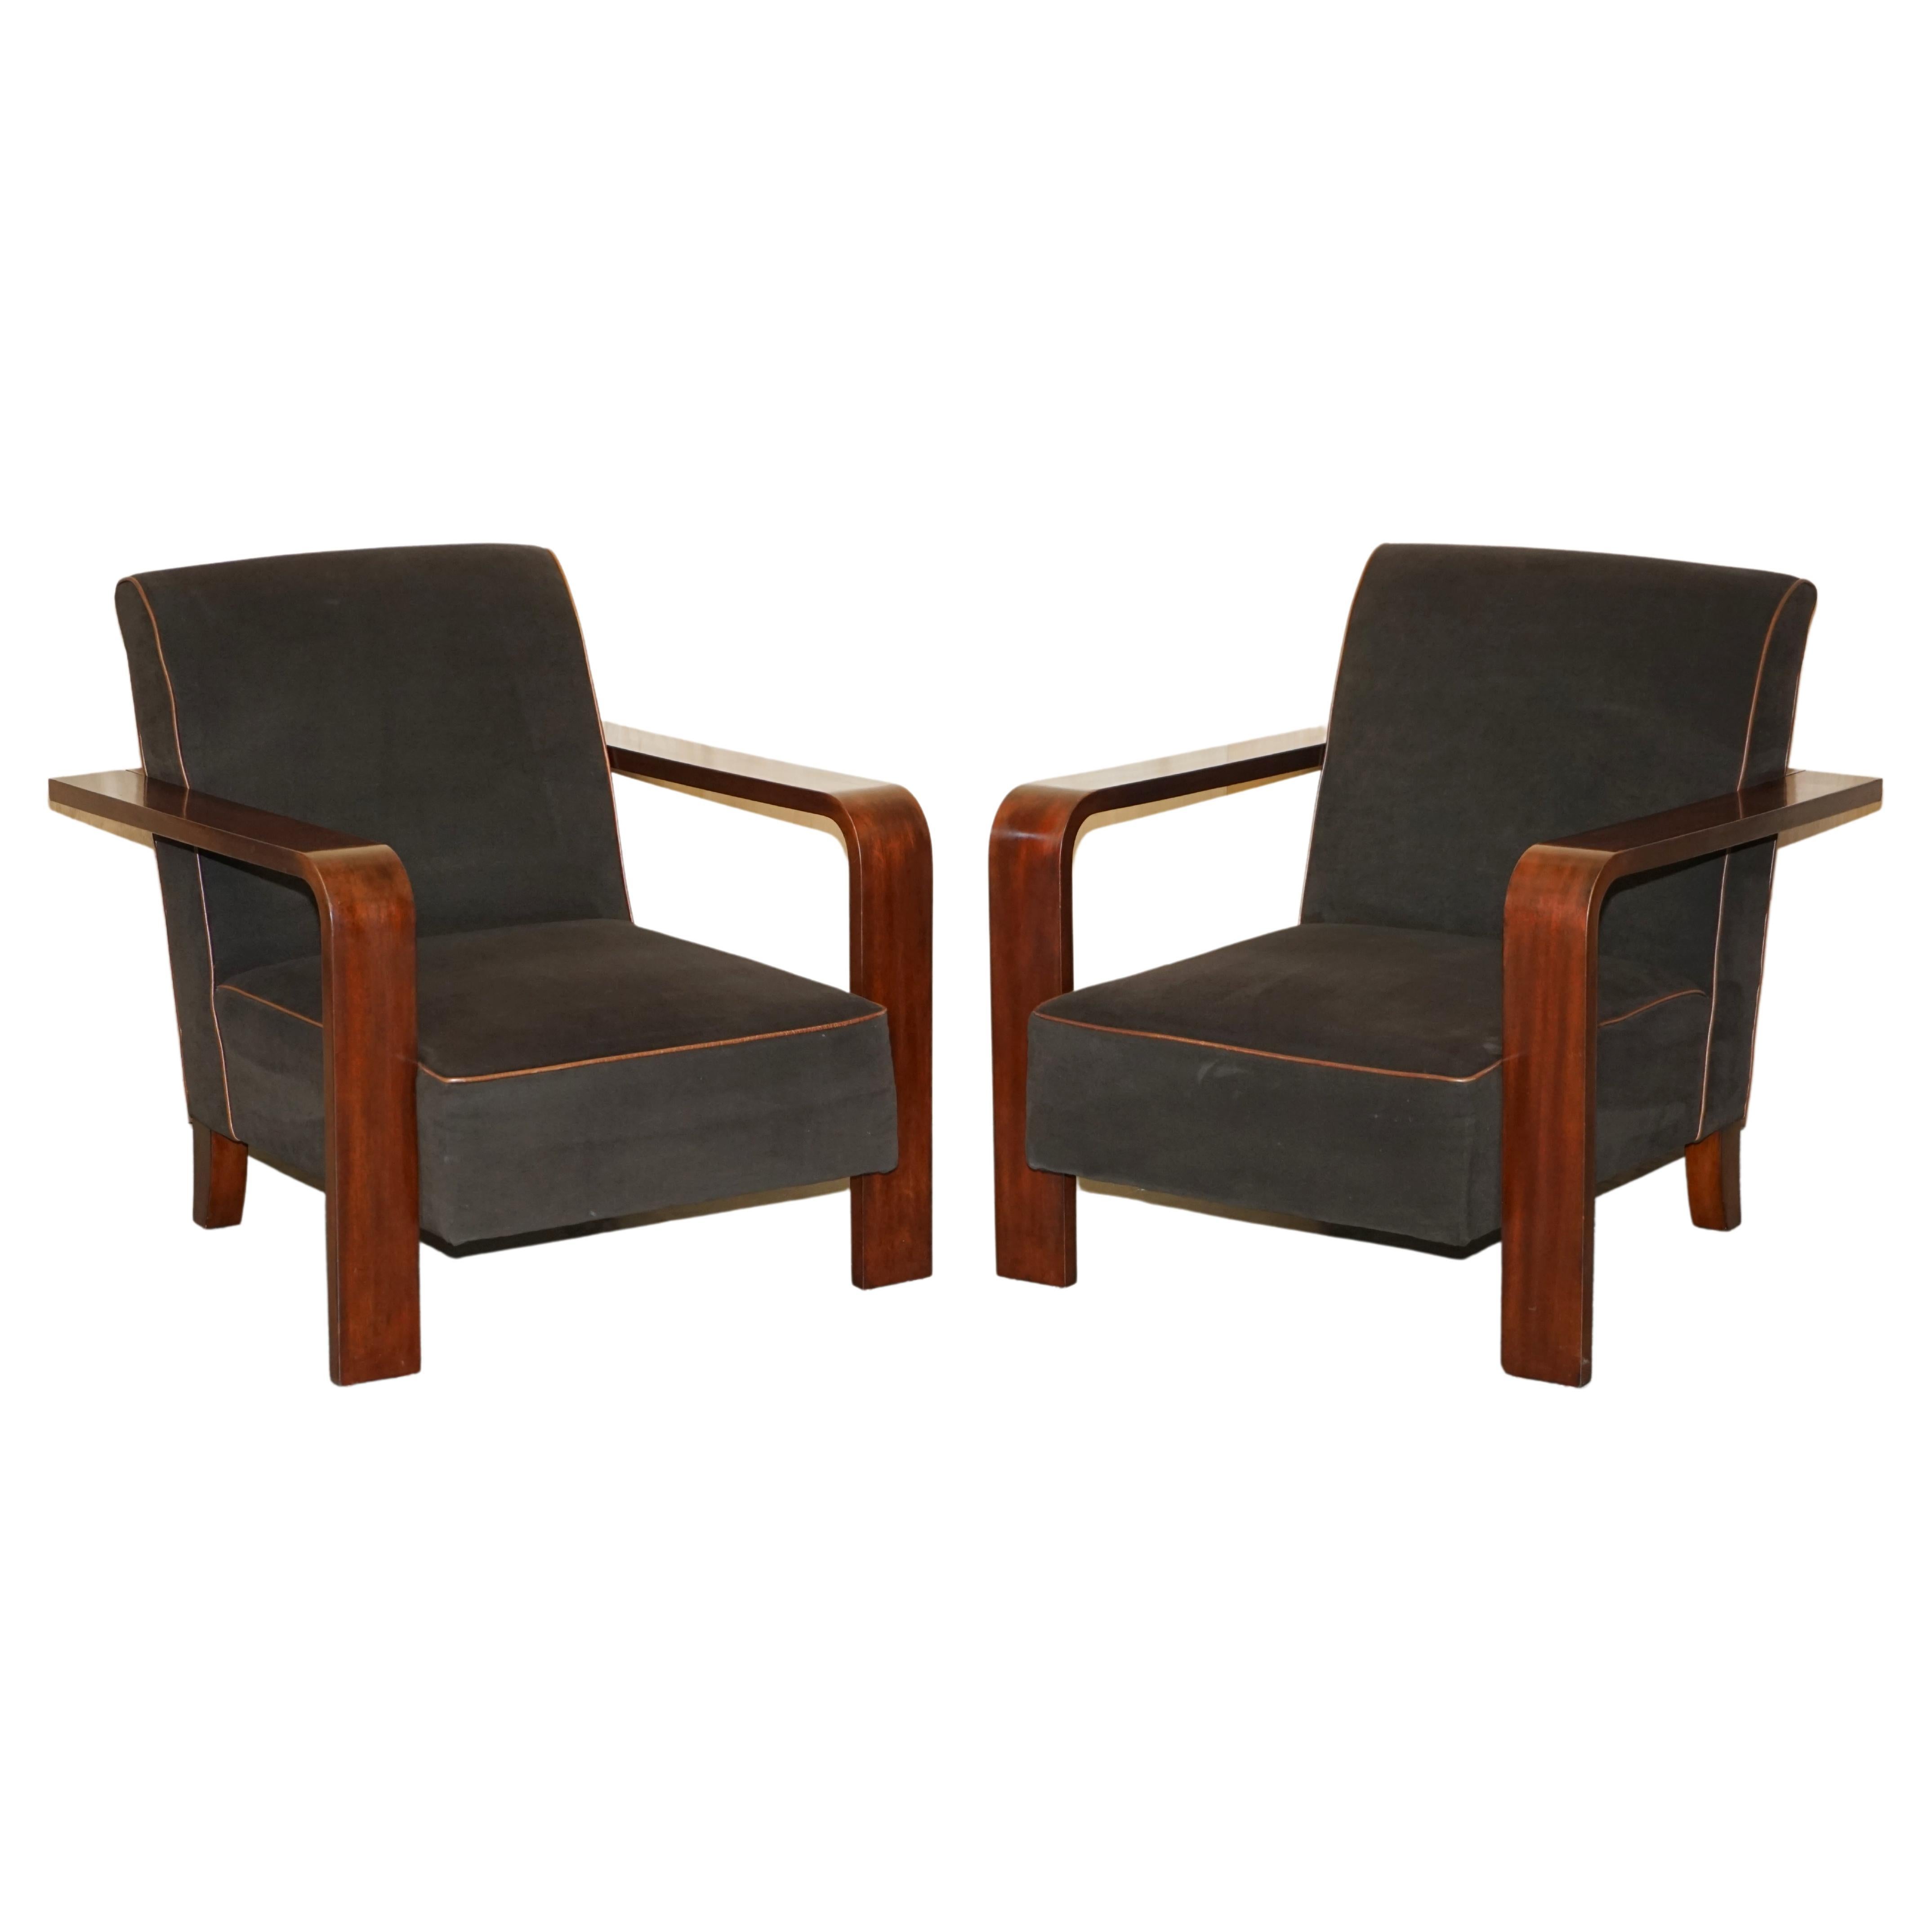 PAIR OF RALPH LAUREN LOUNGE MODERNE HARDWOOD ARMCHAiRS MOHAIR LEATHEr For Sale